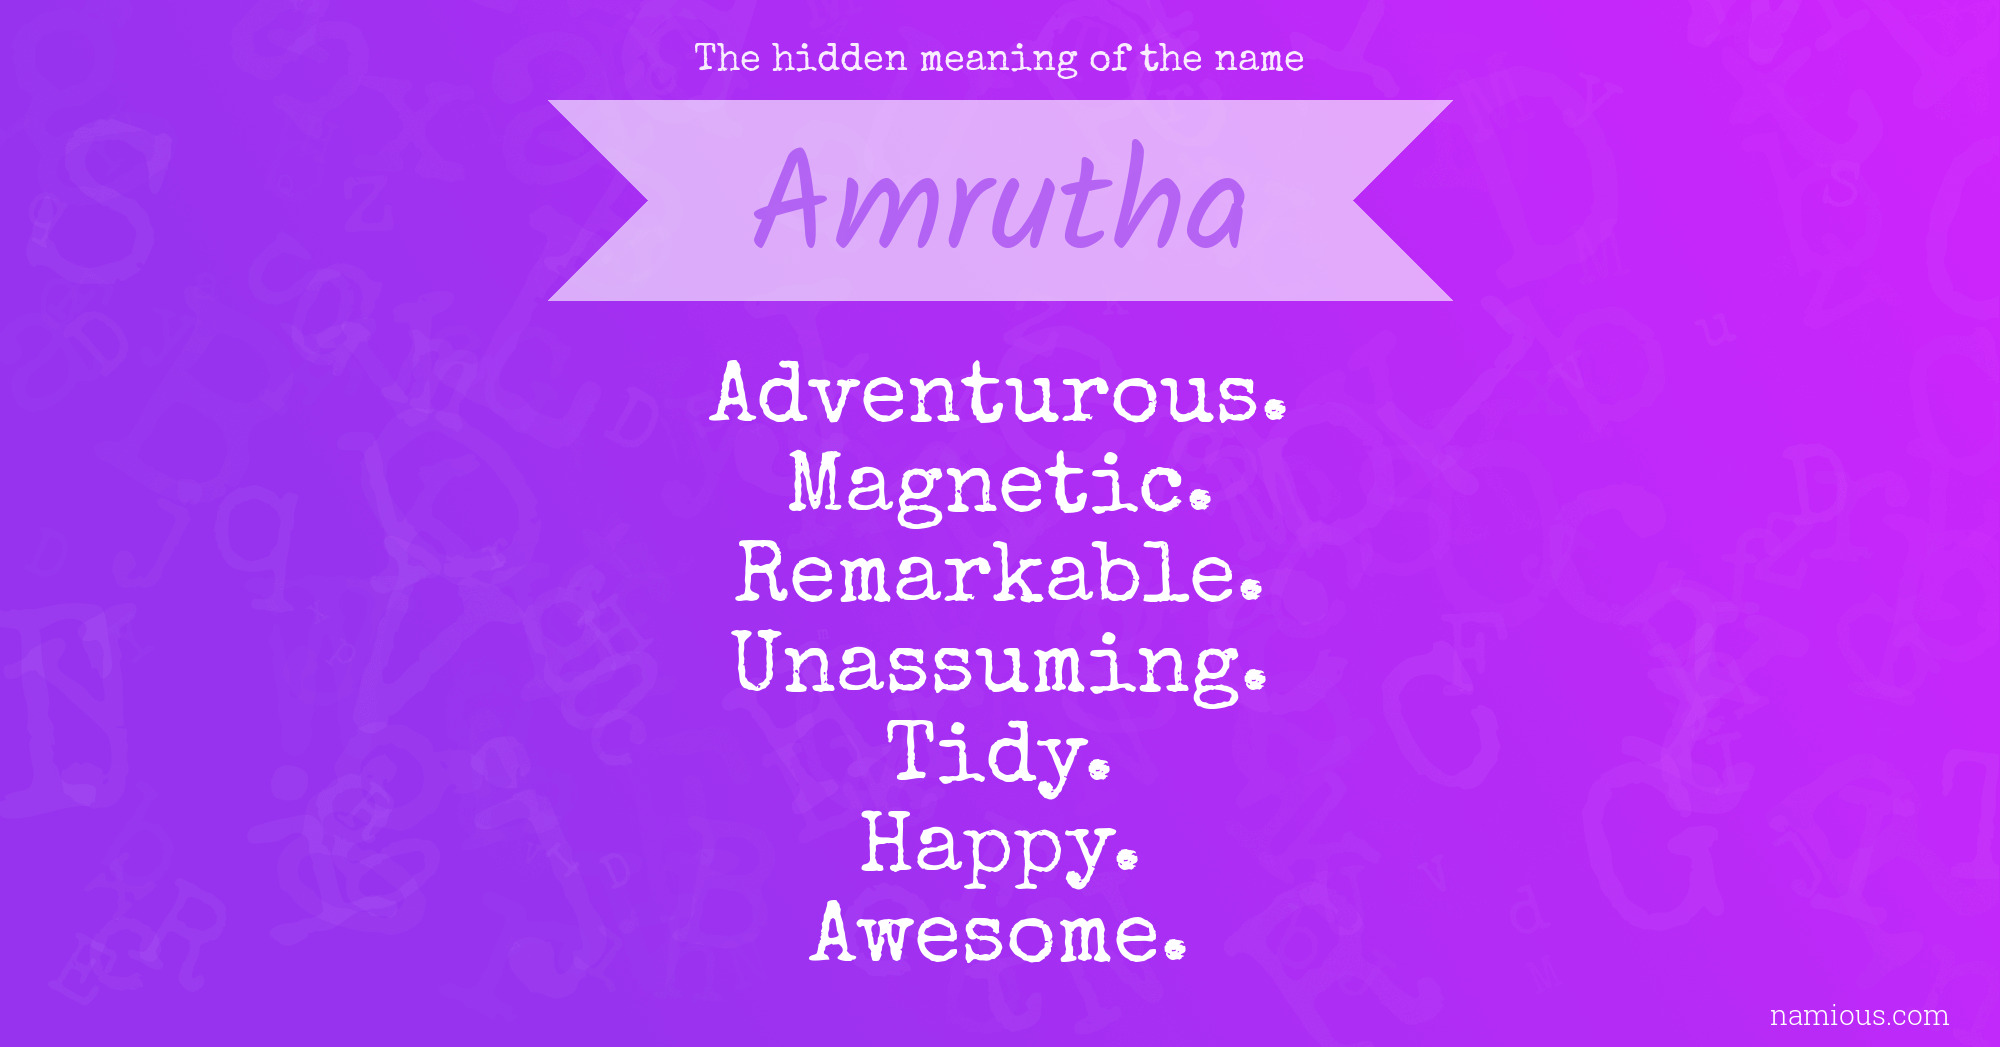 The hidden meaning of the name Amrutha